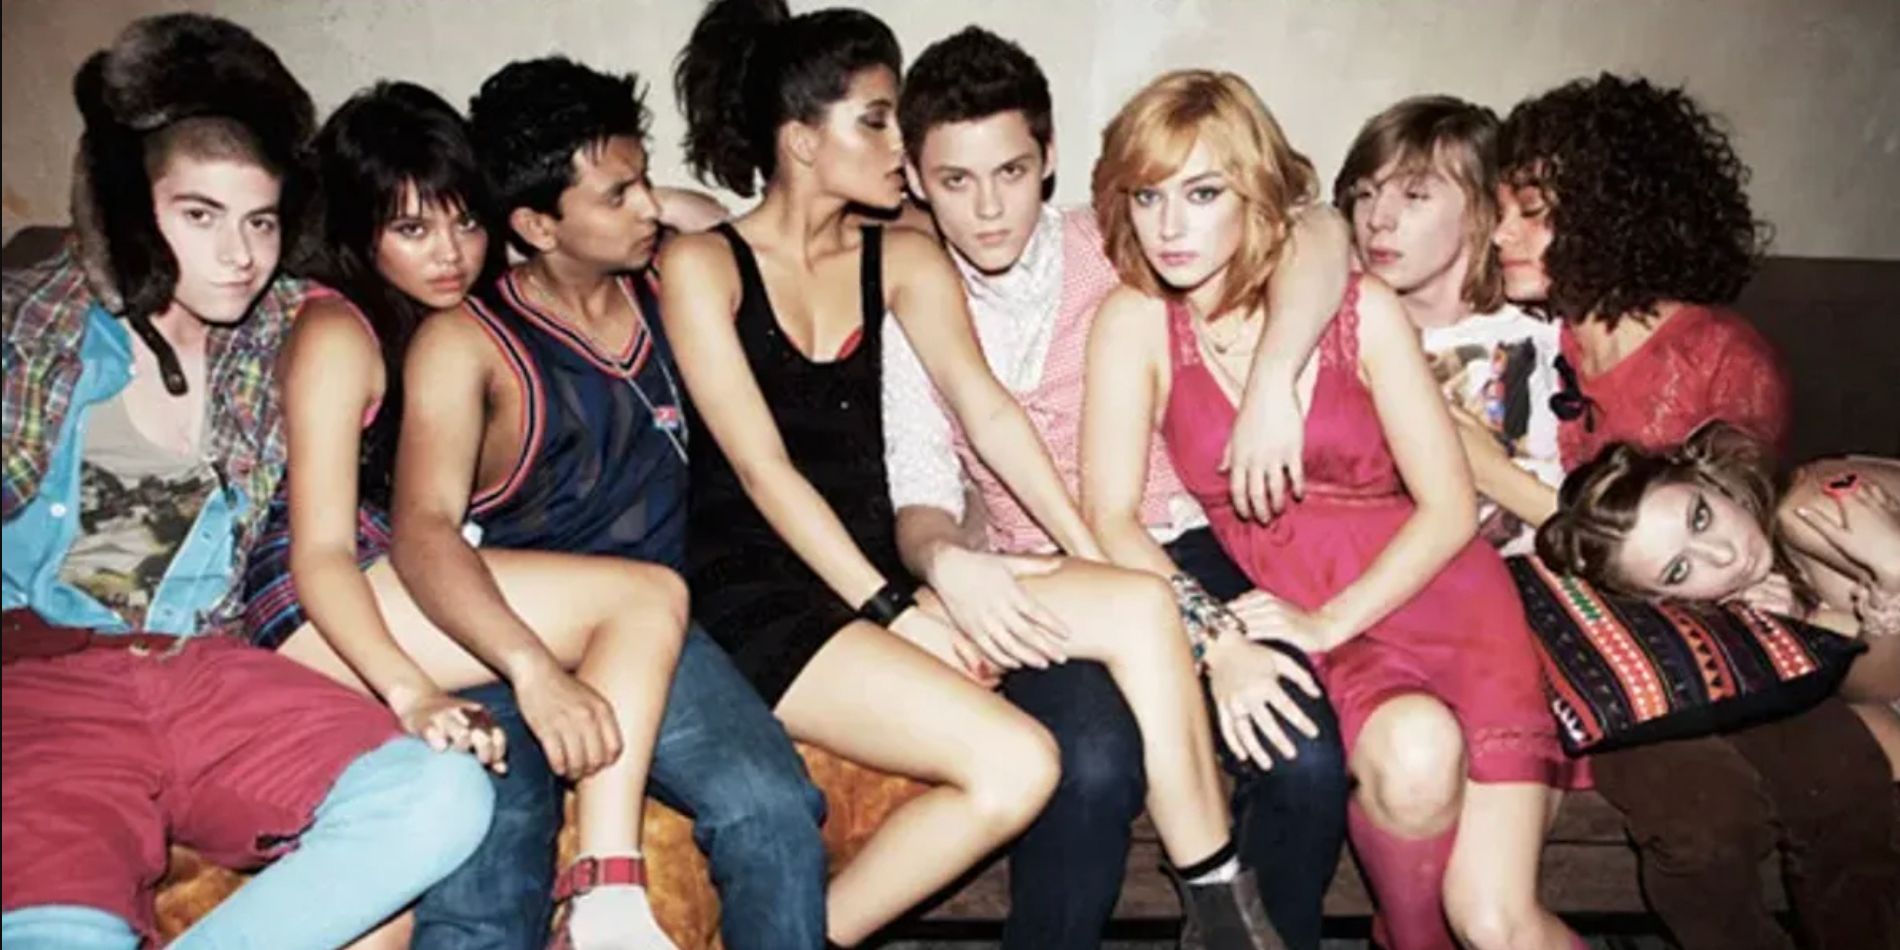 The cast of MTV Skins on a couch with their arms around one another and their legs crossed over one another